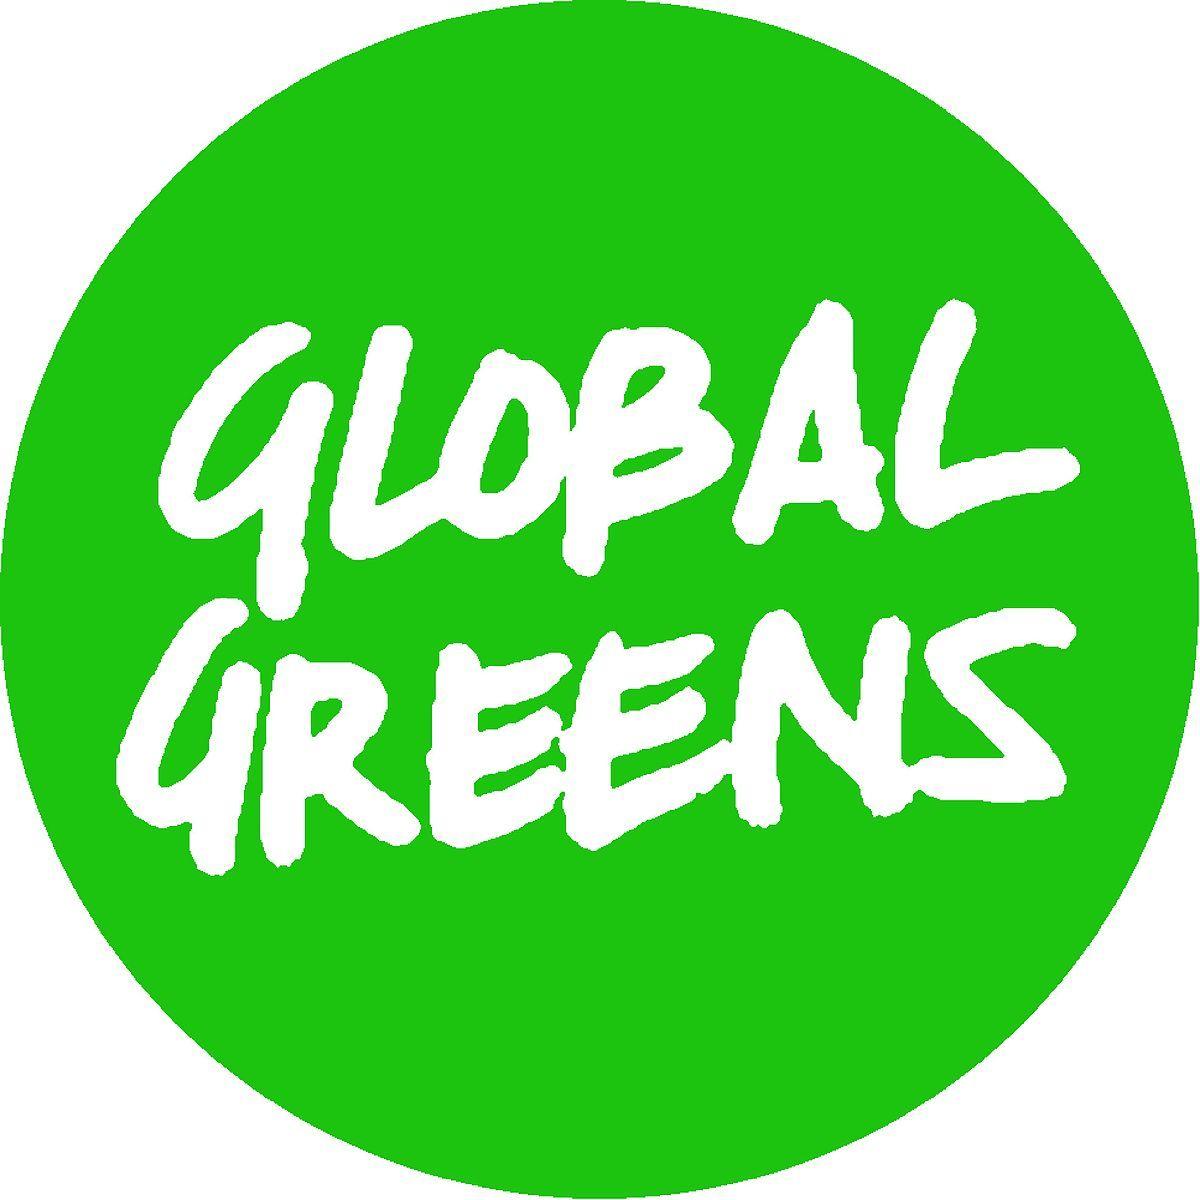 What Has a Green Oval Logo - Global Greens